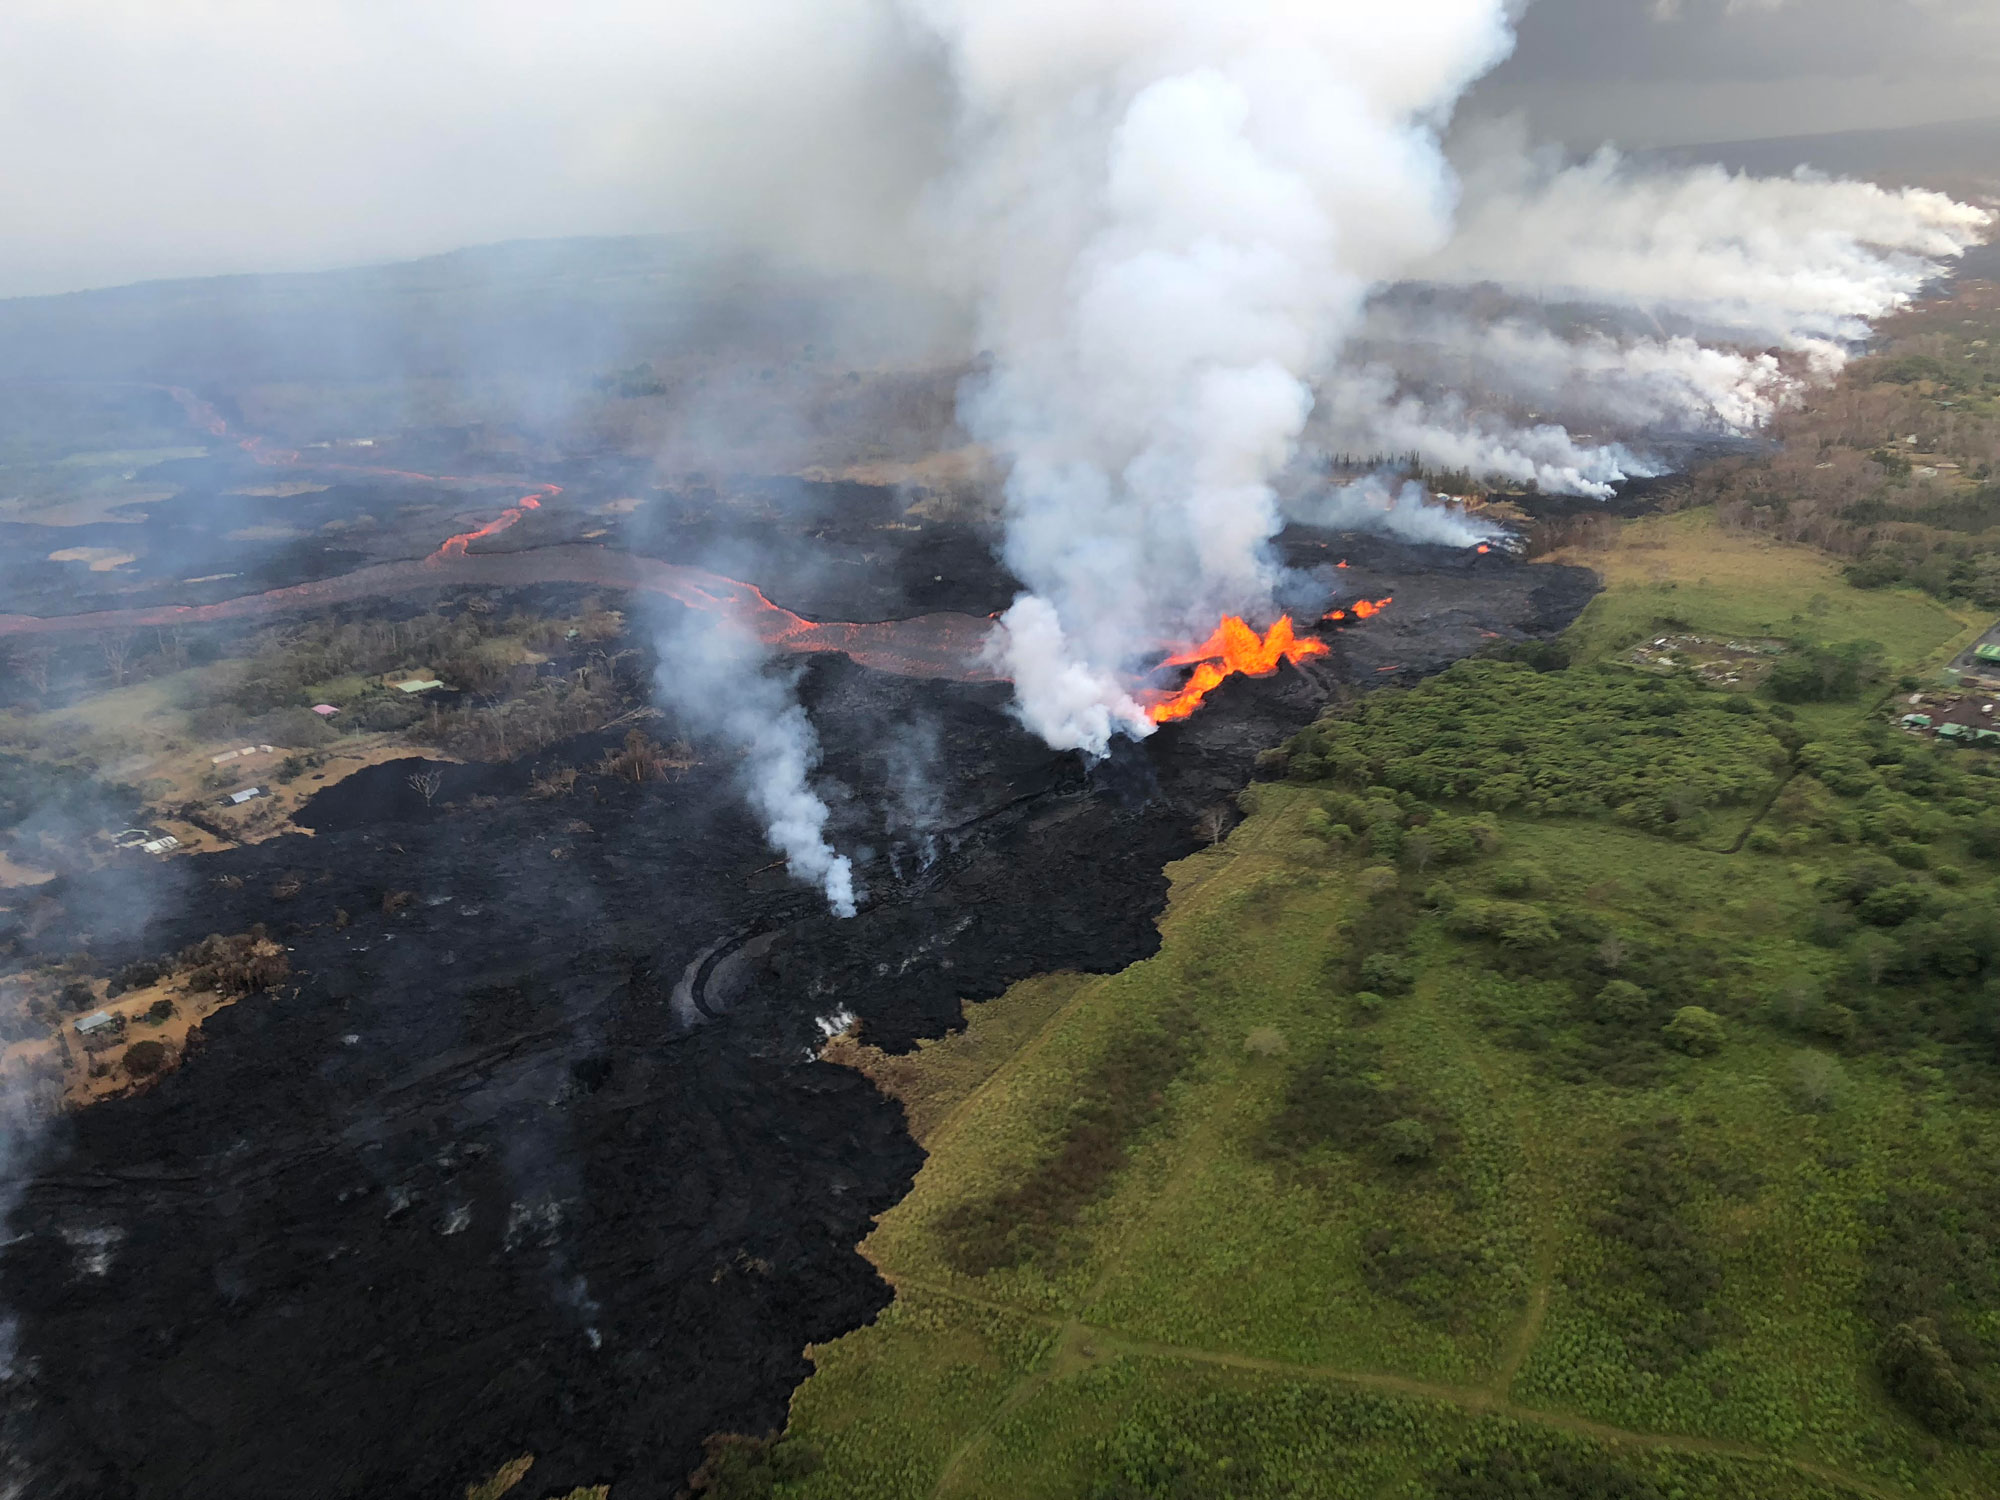 Photograph of a lava flow on Hawai'i in 2018. The lava flow goes from the upper right to lower left of the image. In the background (upper right), smoke rises from the lava flow. In the center of the image, orange lava is visible flowing off to the left center and upper left portions of the image. In the lower left, cooling black lava rock is present. To the right of the lava flow, a green, vegetated landscape is present. At center-right, buildings and infrastructure of the geothermal plant can be seen.